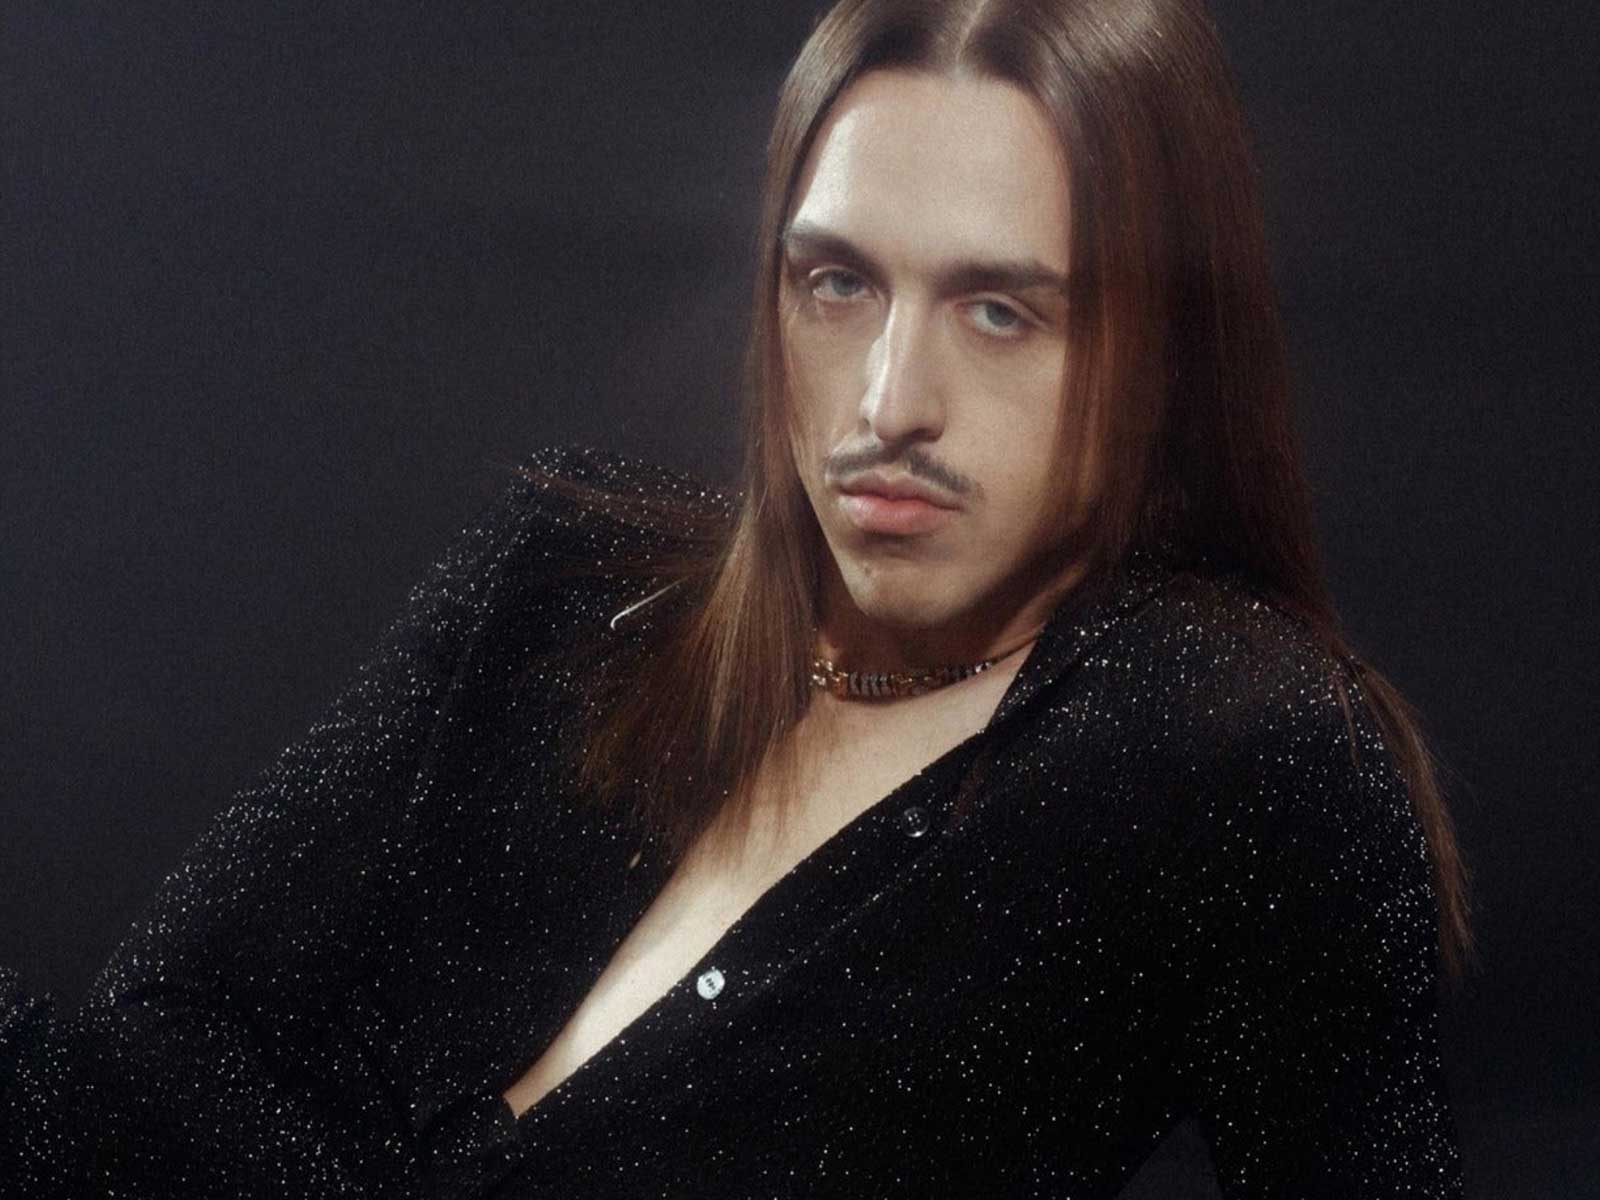 Tommy Cash teams up with Kappa to launch… a vibrator